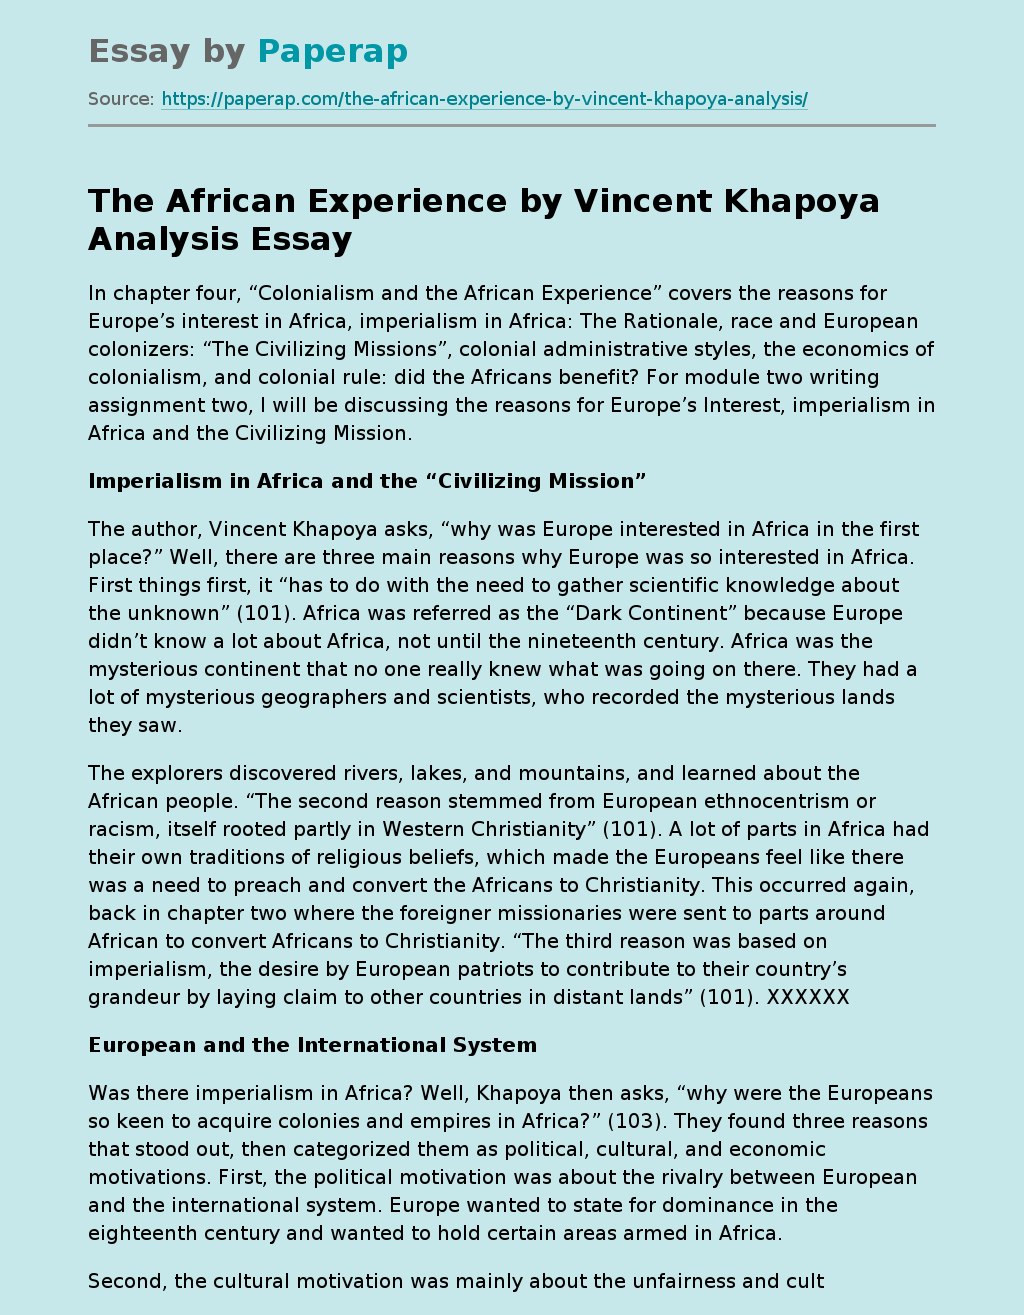 The African Experience by Vincent Khapoya Analysis